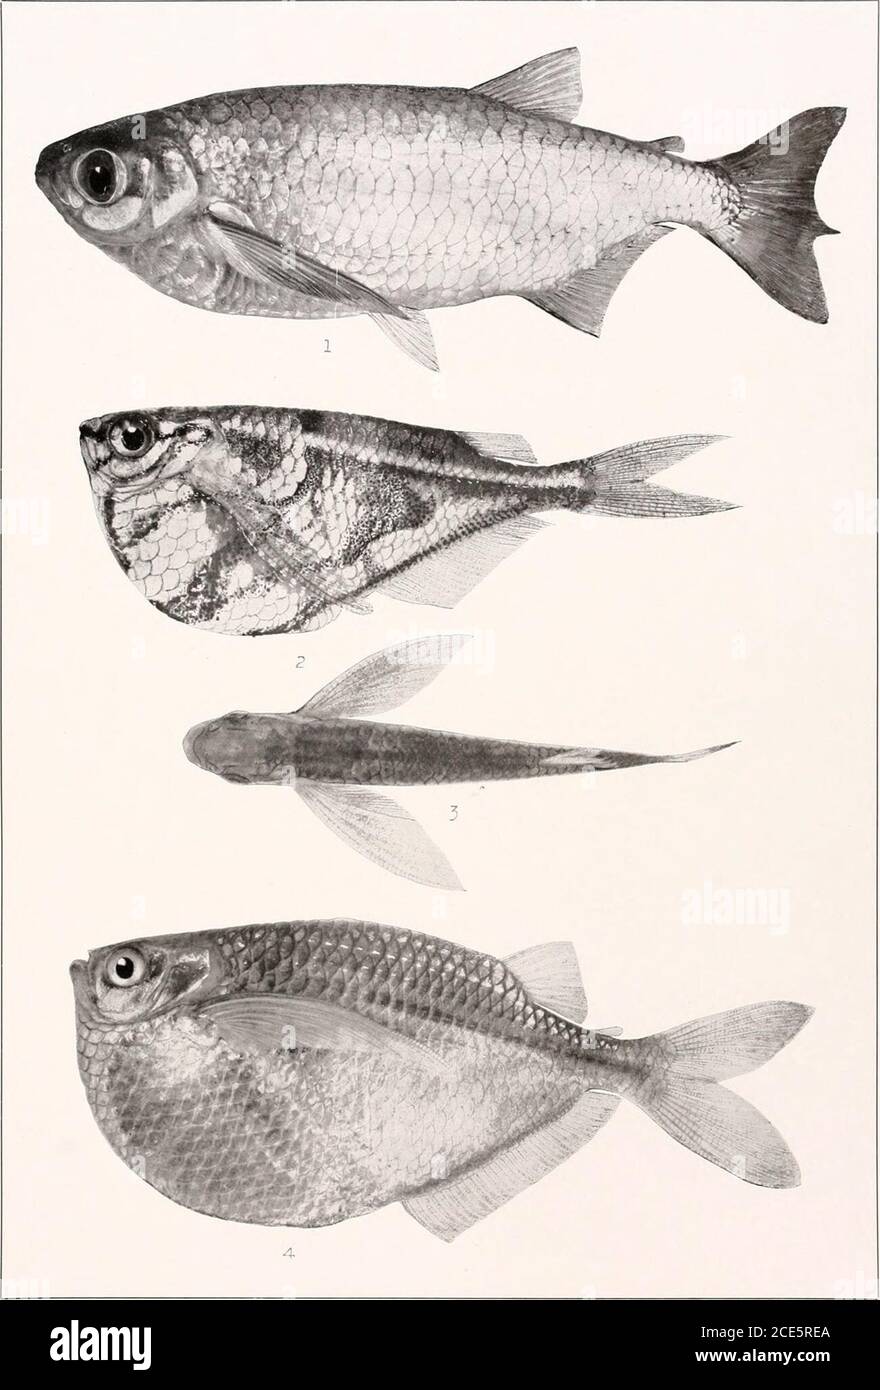 . The freshwater fishes of British Guiana, including a study of the ecological grouping of species and the relation of the fauna of the plateau to that of the lowlands . 1. Holobrycon pesu (Mtjller and Troschel). 150 mm. I. I. No. 12,105. 2. Brycon falcatus Muller andTroschel. 225 mm. No. 1818. 3. Brycon siebenthah Eigenmann. (Type.) 204 mm. No. 1819. Memoirs Carnegie Museum, Vol. V. Plate lv.. 1. Chalcinus rotundatus (Schomburgk). 186 nun. No. 2059a. 2. CarnegieUa strigata (Gunther).41 mm. No. 1296. 3. CarnegieUa strigata (Gunther). 41 mm. No. 1296. 4. Gasteropelecus sternicla(LiNNiEus). 65 m Stock Photo